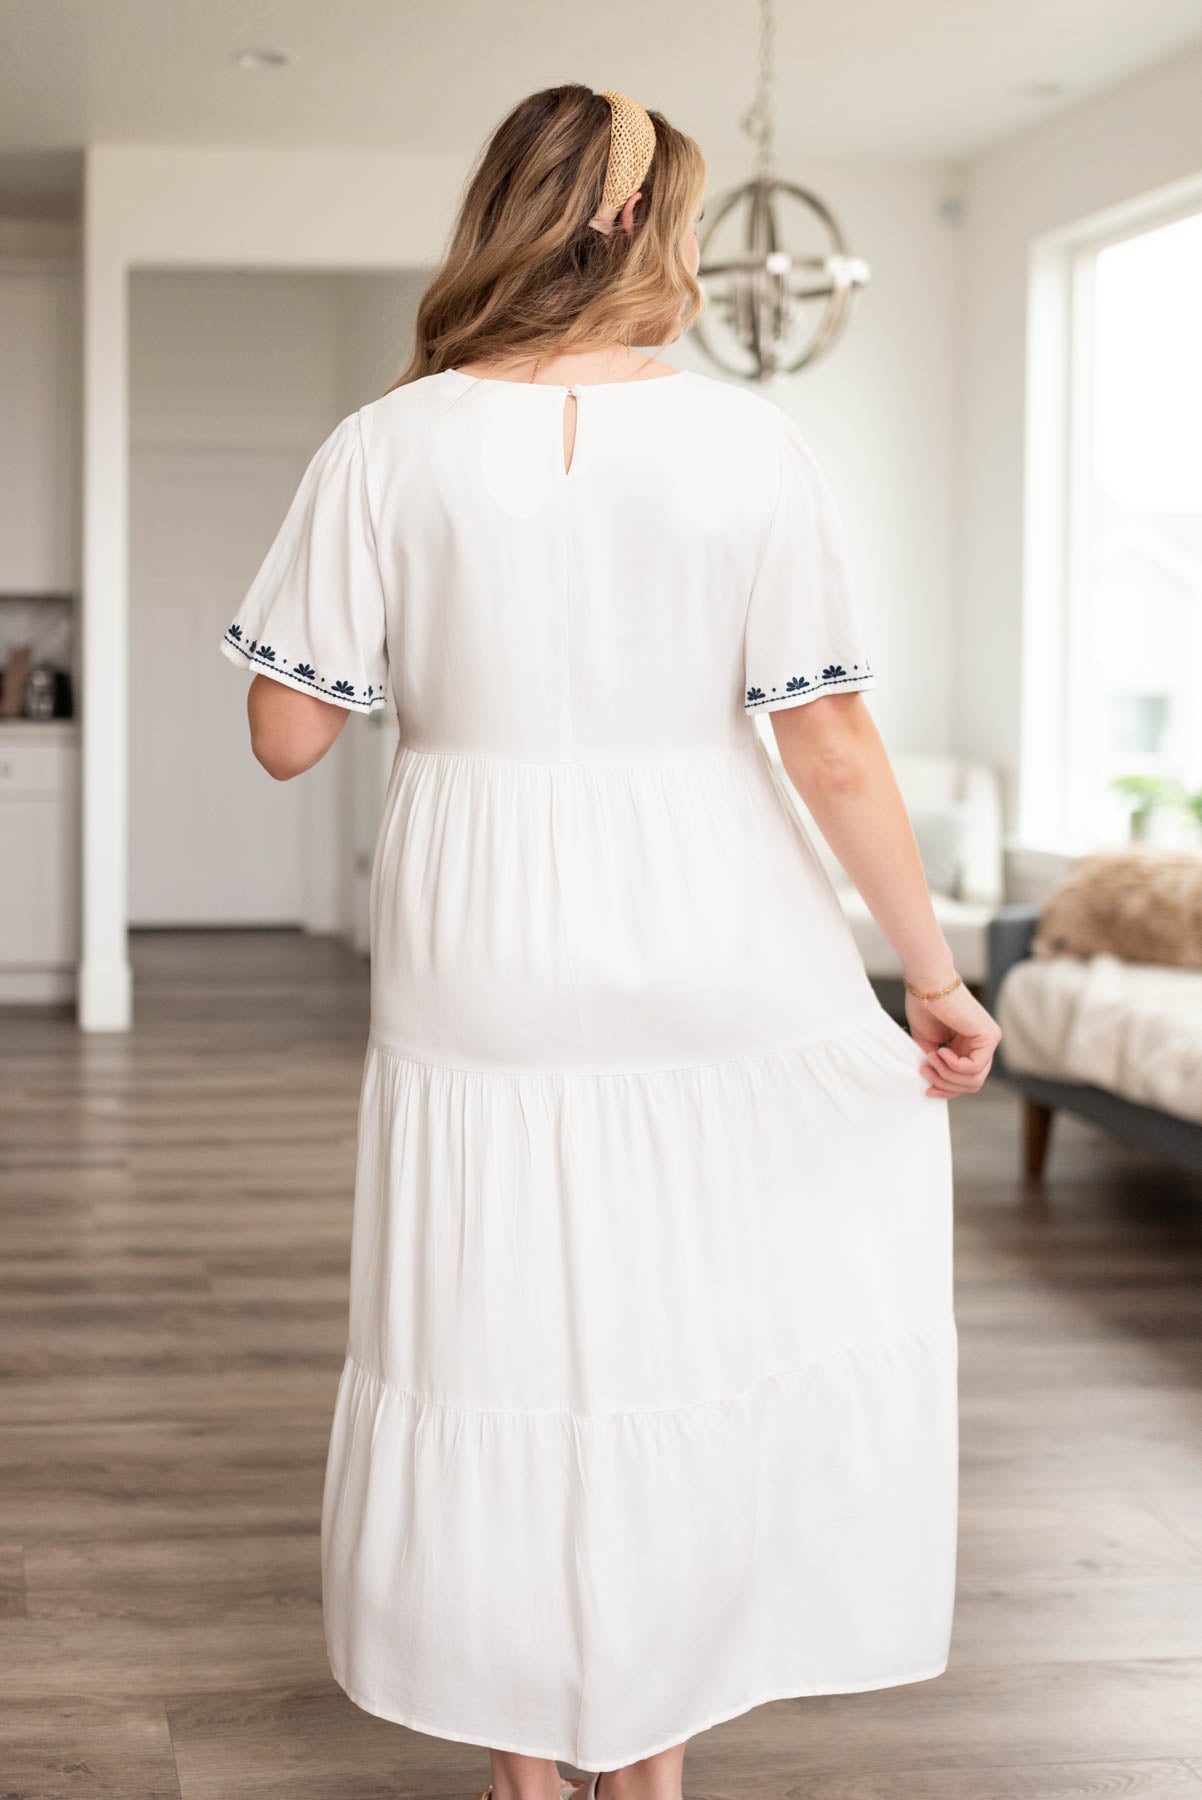 Back view of the white embroidered dress